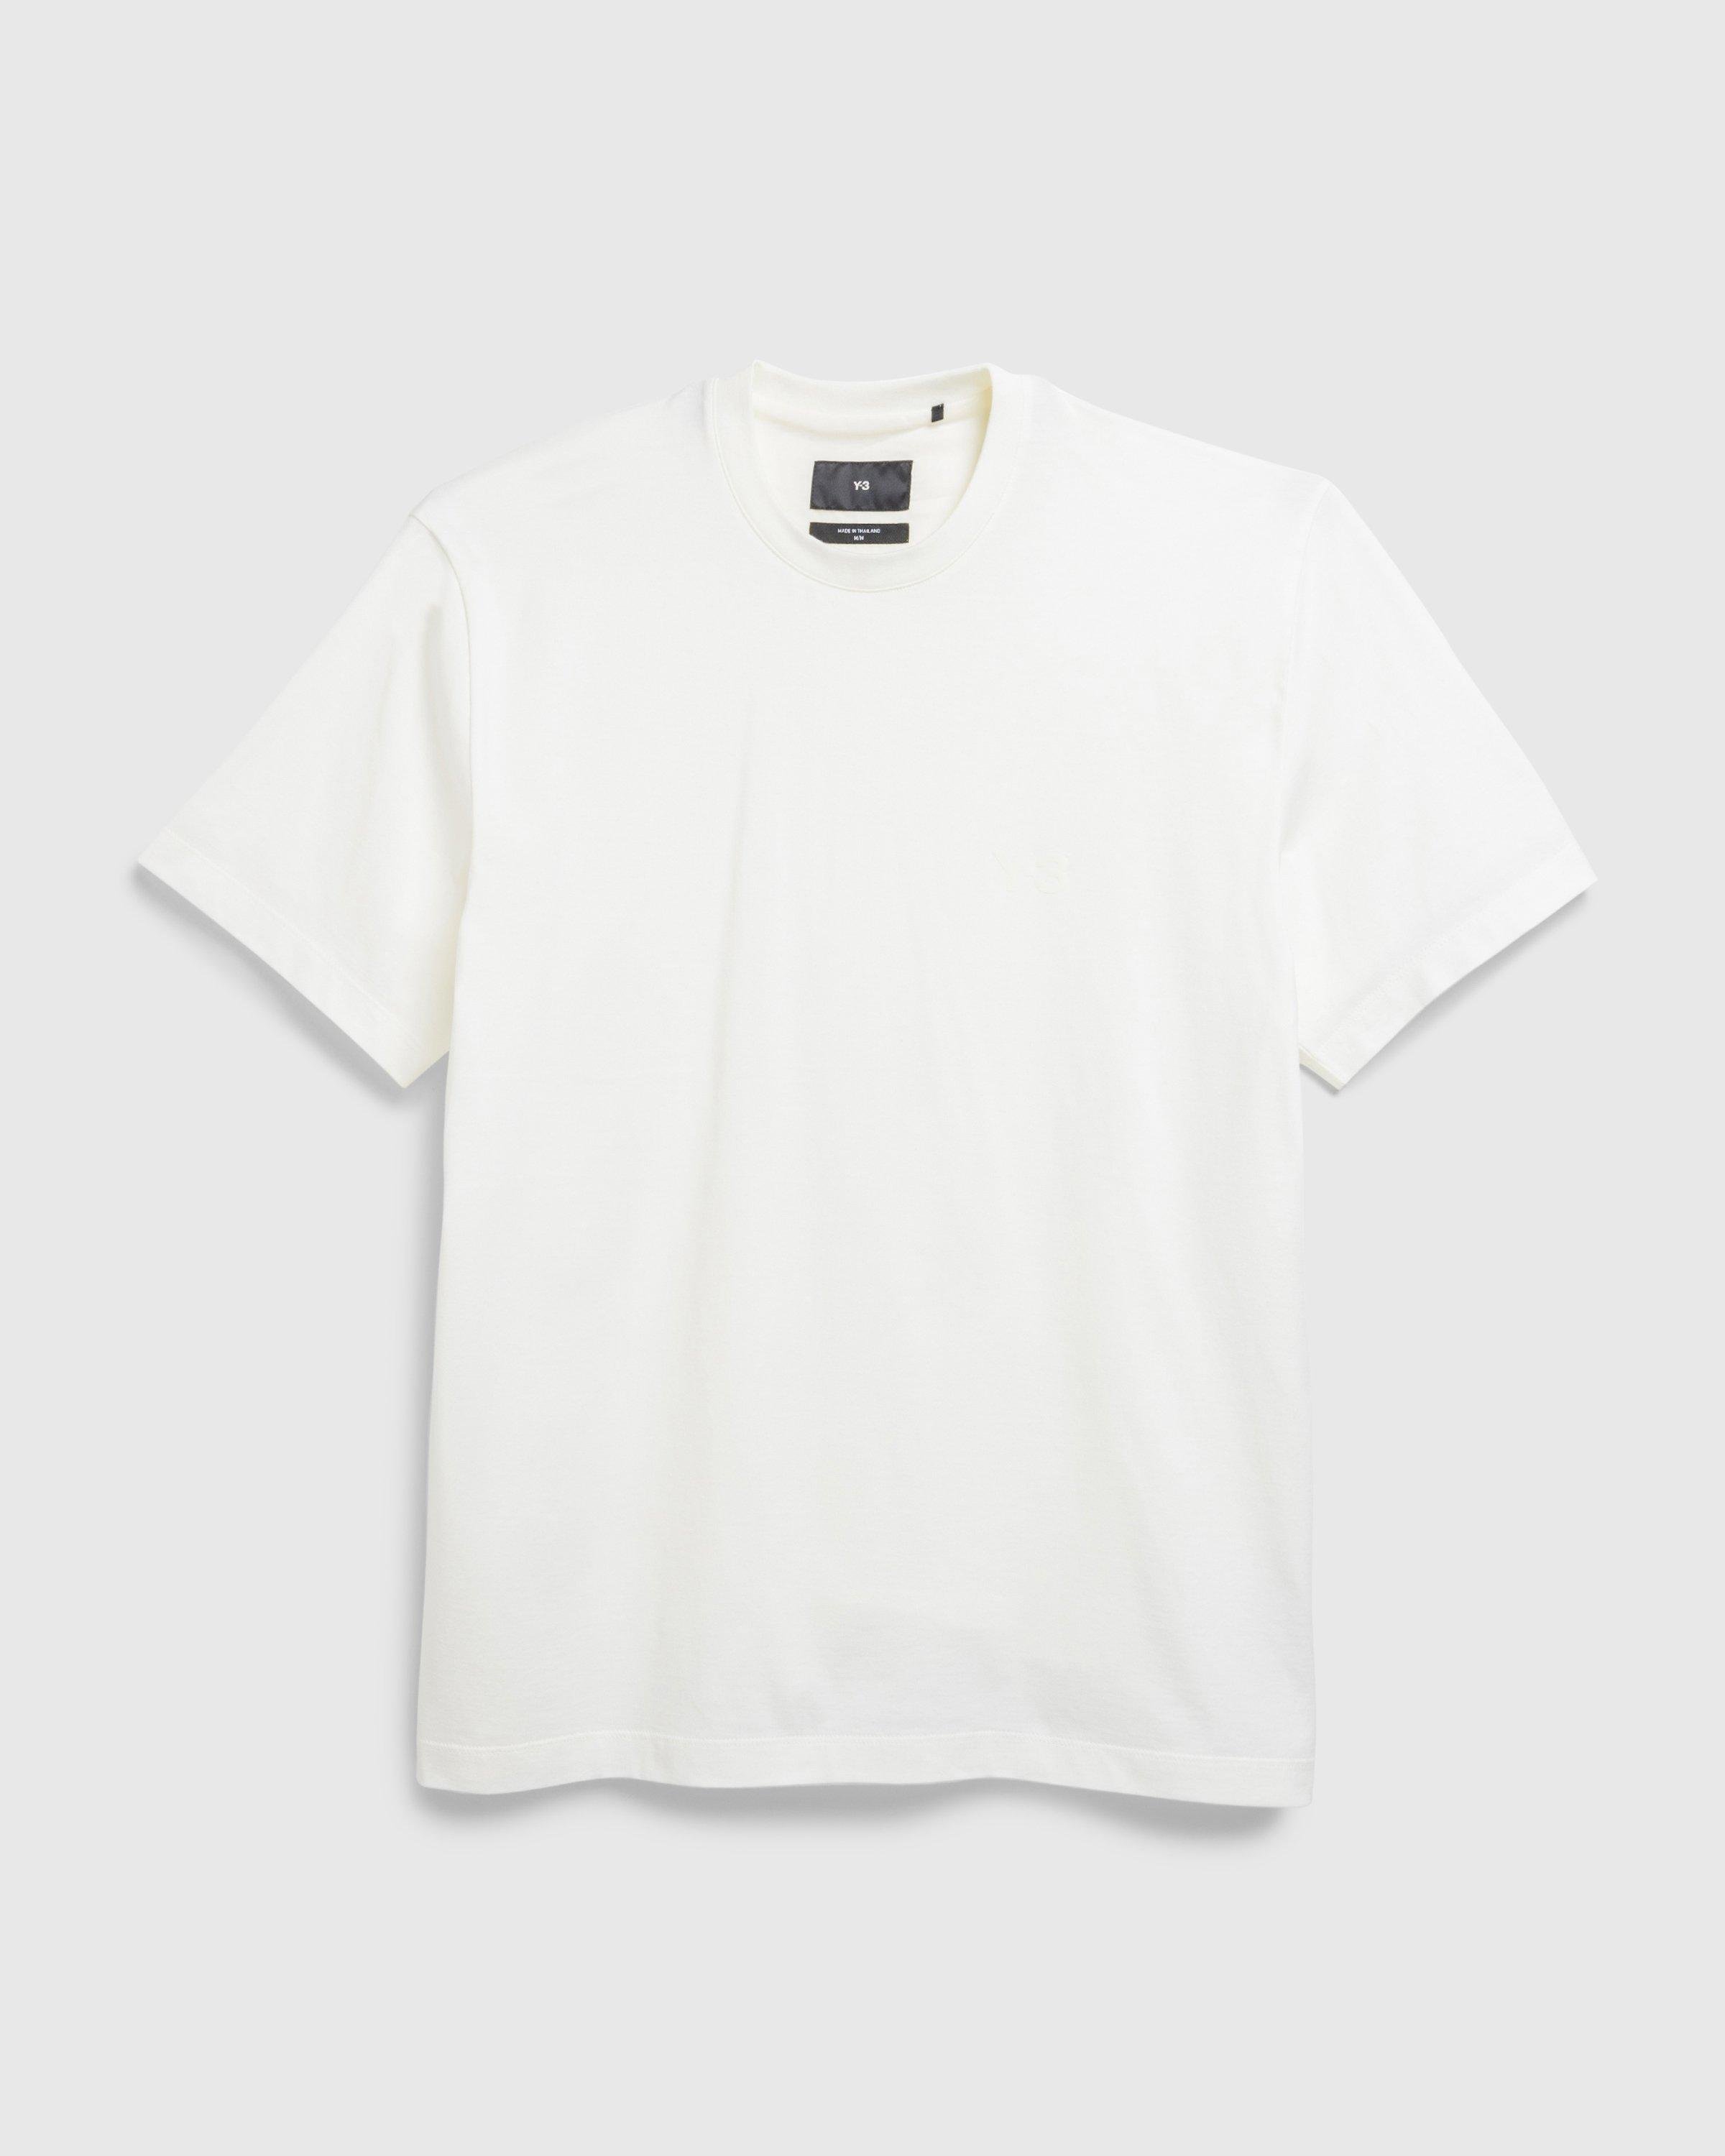 Y-3Relaxed SS Tee White by HIGHSNOBIETY